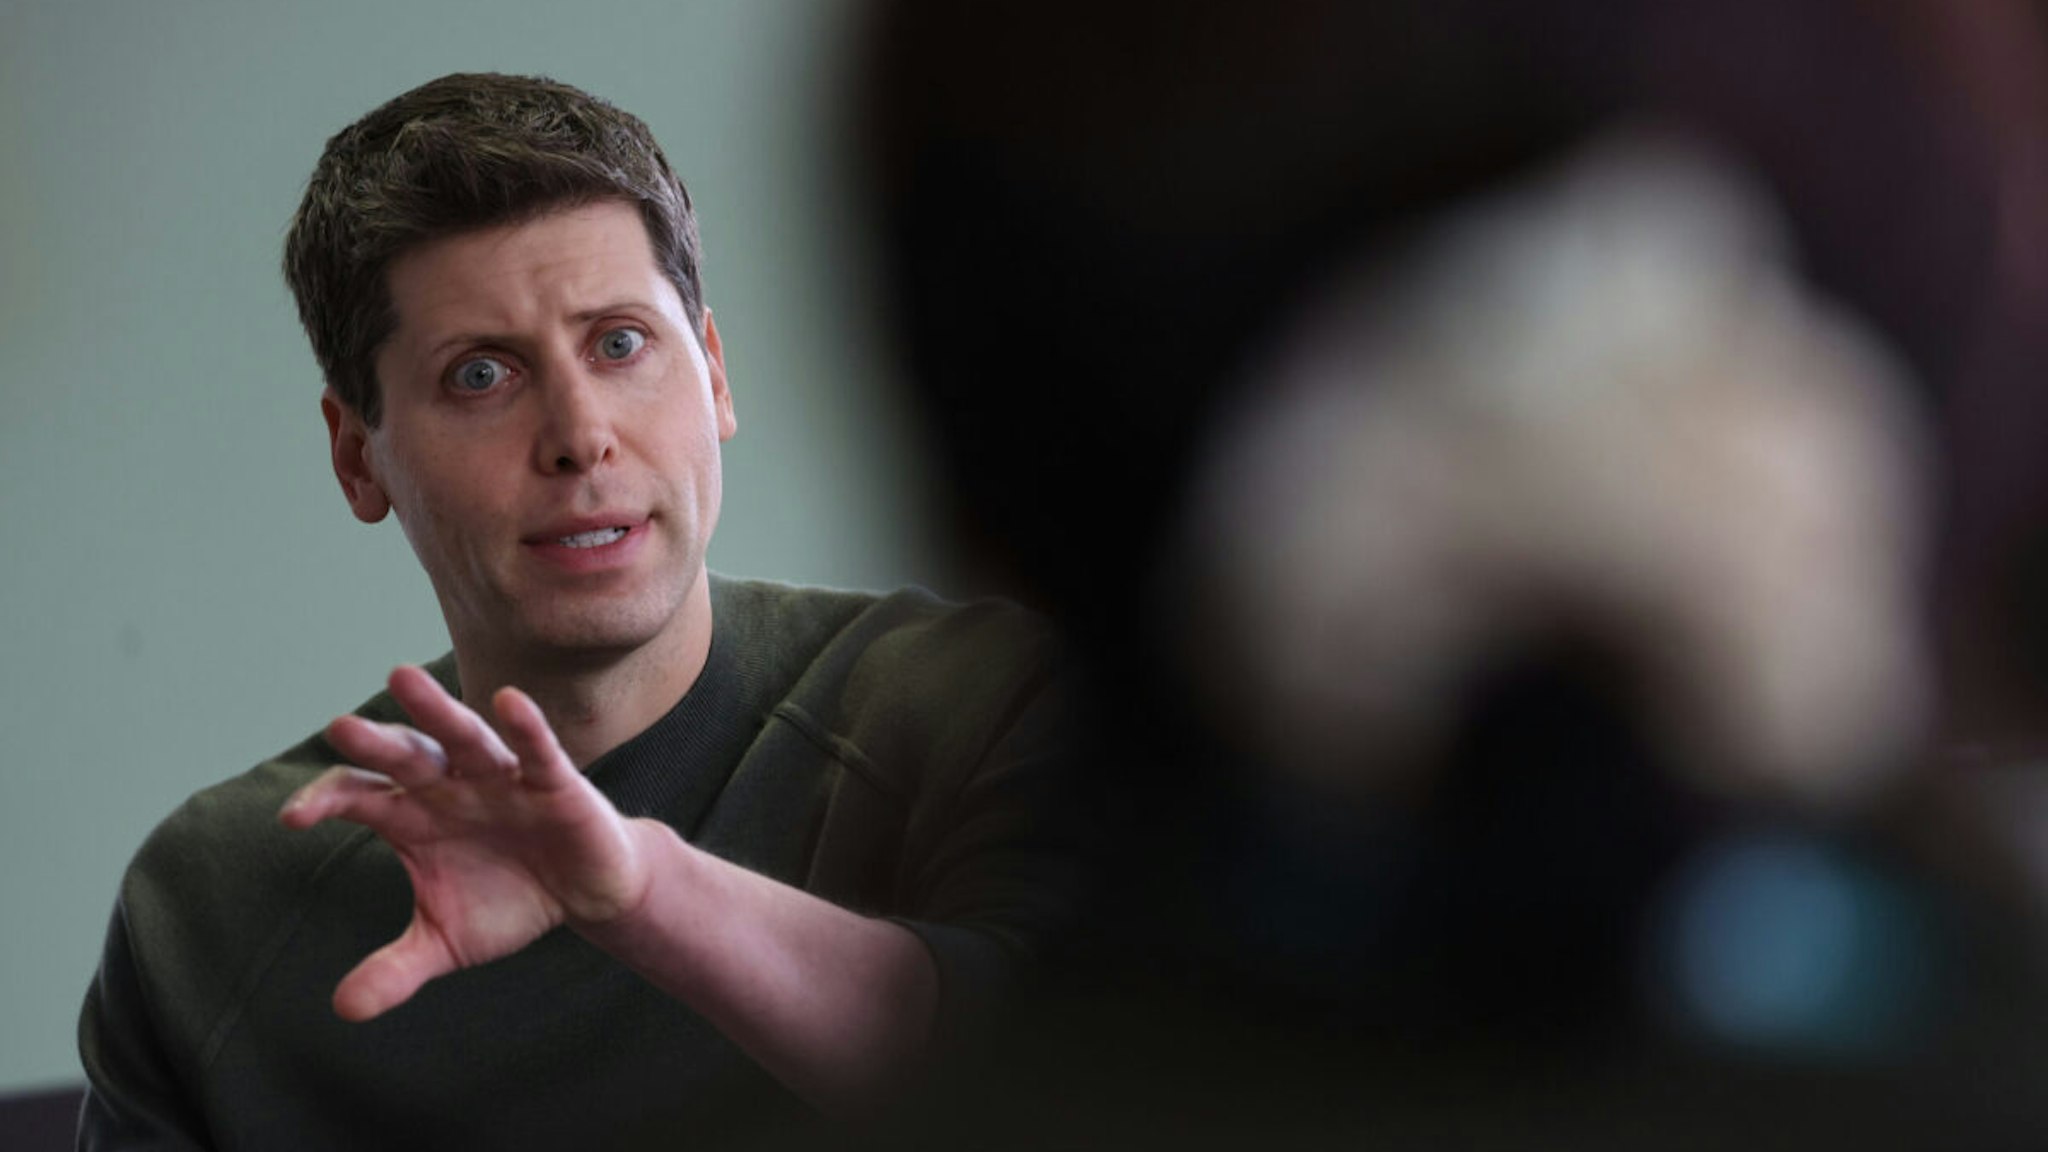 OpenAI CEO Sam Altman speaks to members of the media during the OpenAI DevDay event on November 06, 2023 in San Francisco, California.